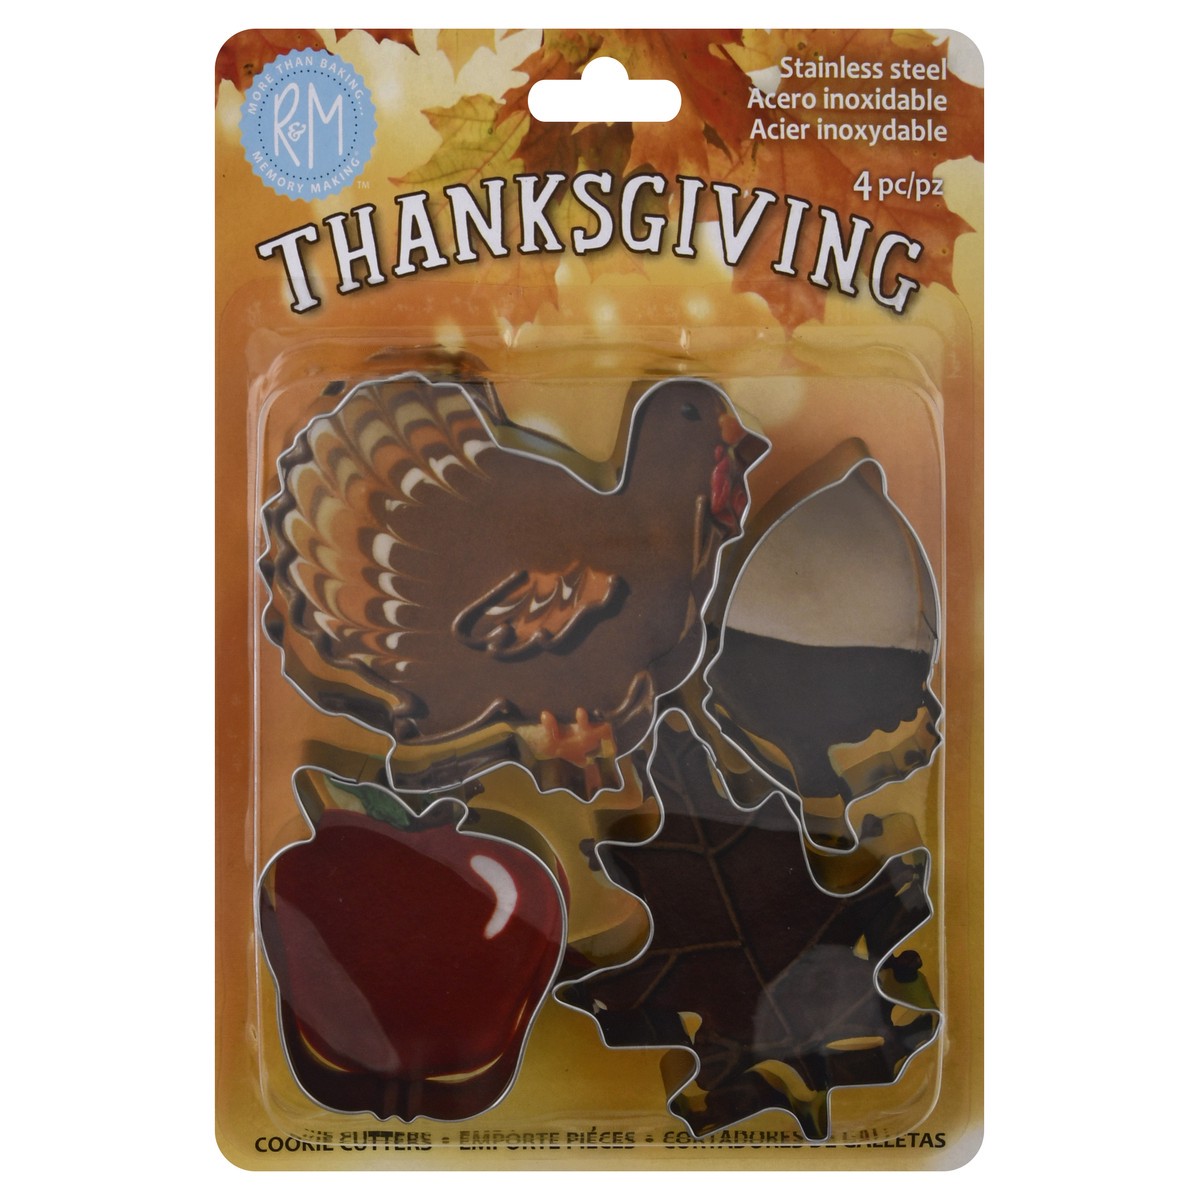 slide 1 of 10, R&M Thanksgiving Stainless Steel Cookie Cutters 4 ea, 4 ct